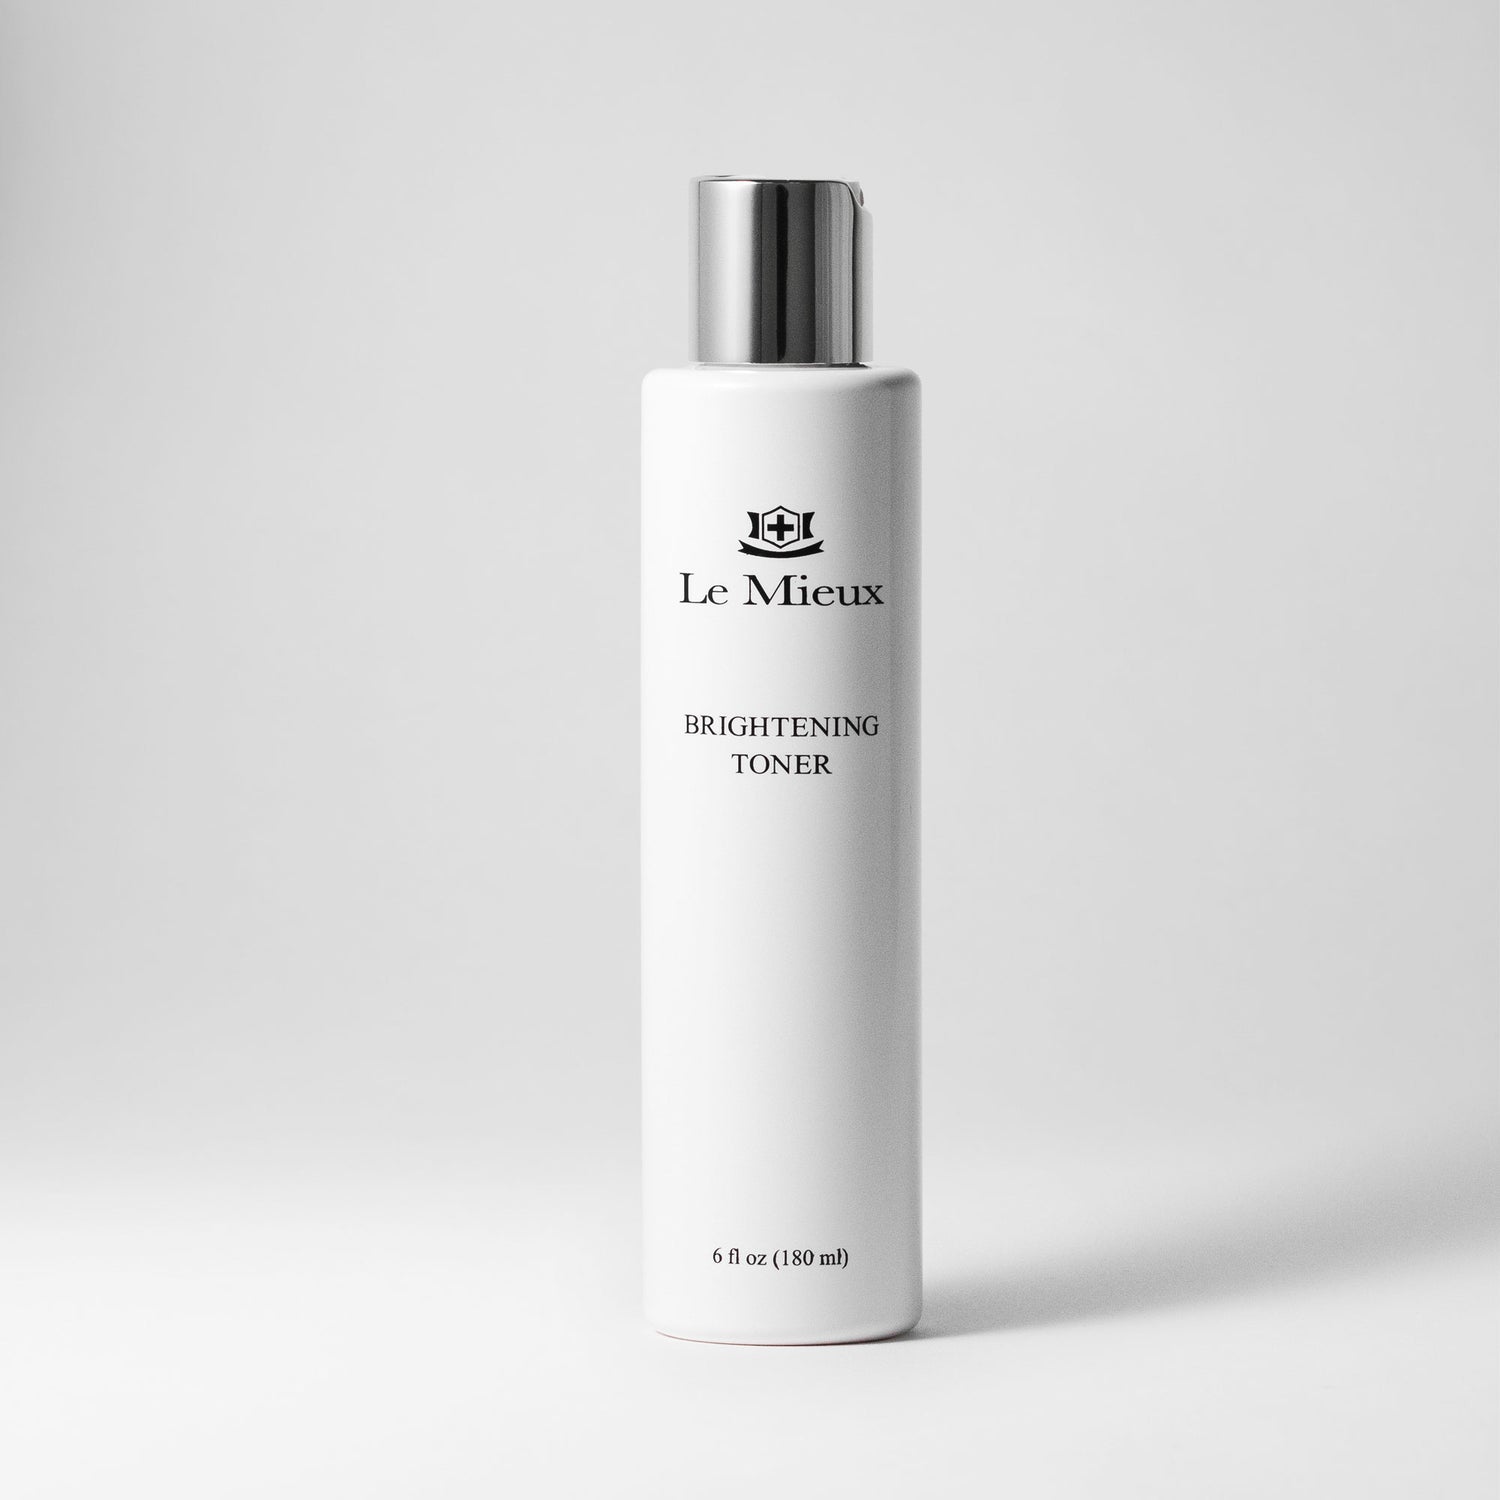  BRIGHTENING TONER from Le Mieux Skincare - featured